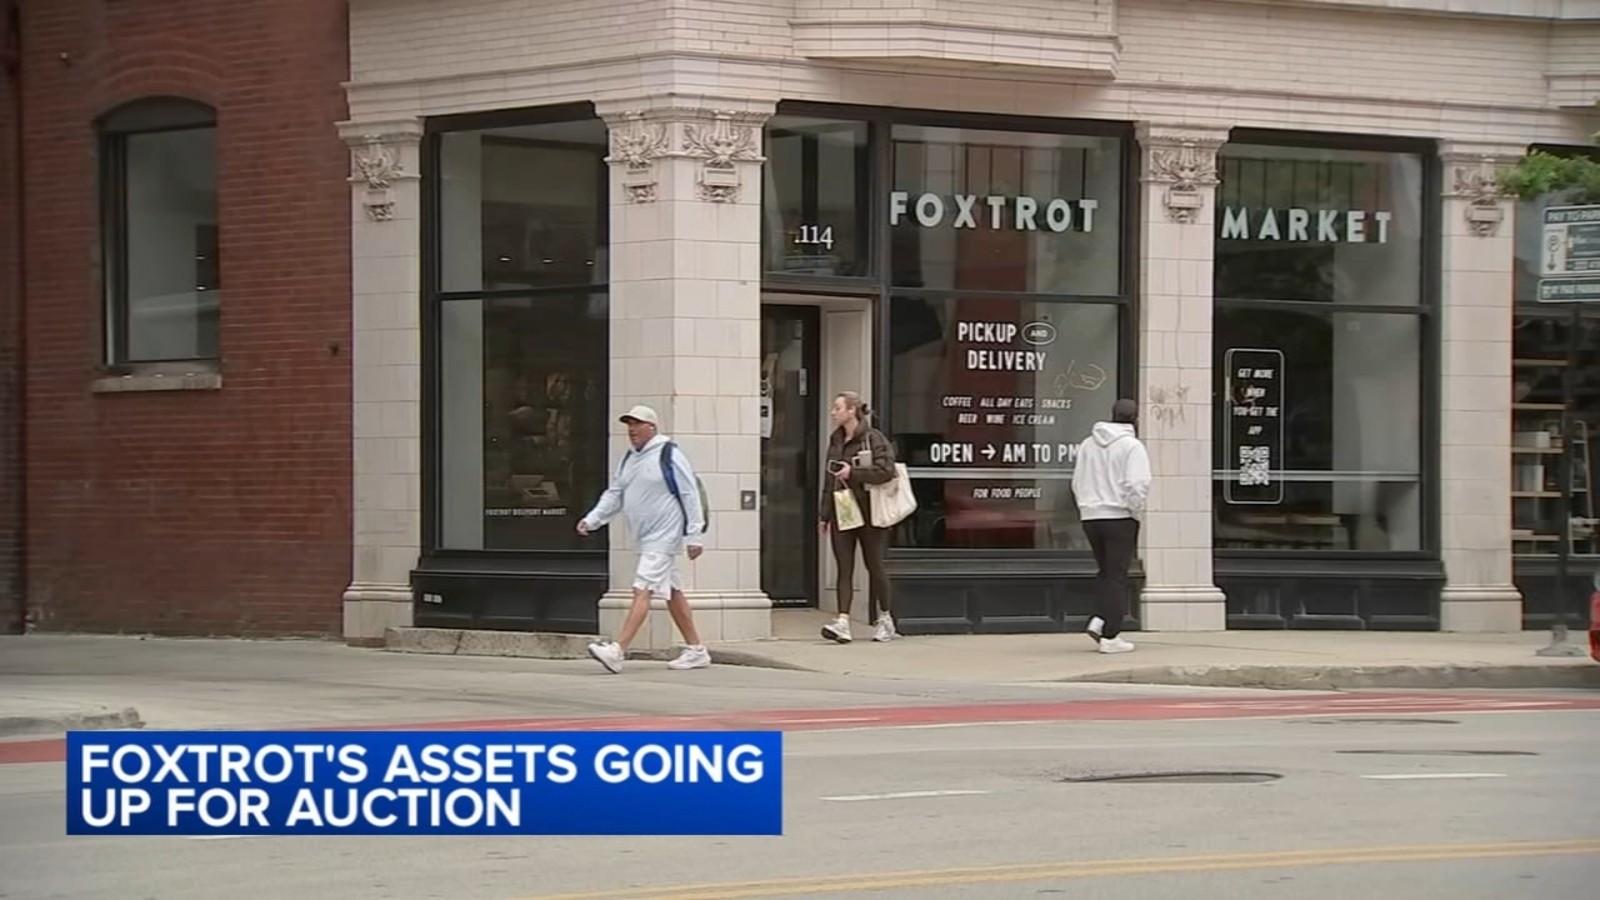 Foxtrot Market assets to be sold at auction following sudden closure